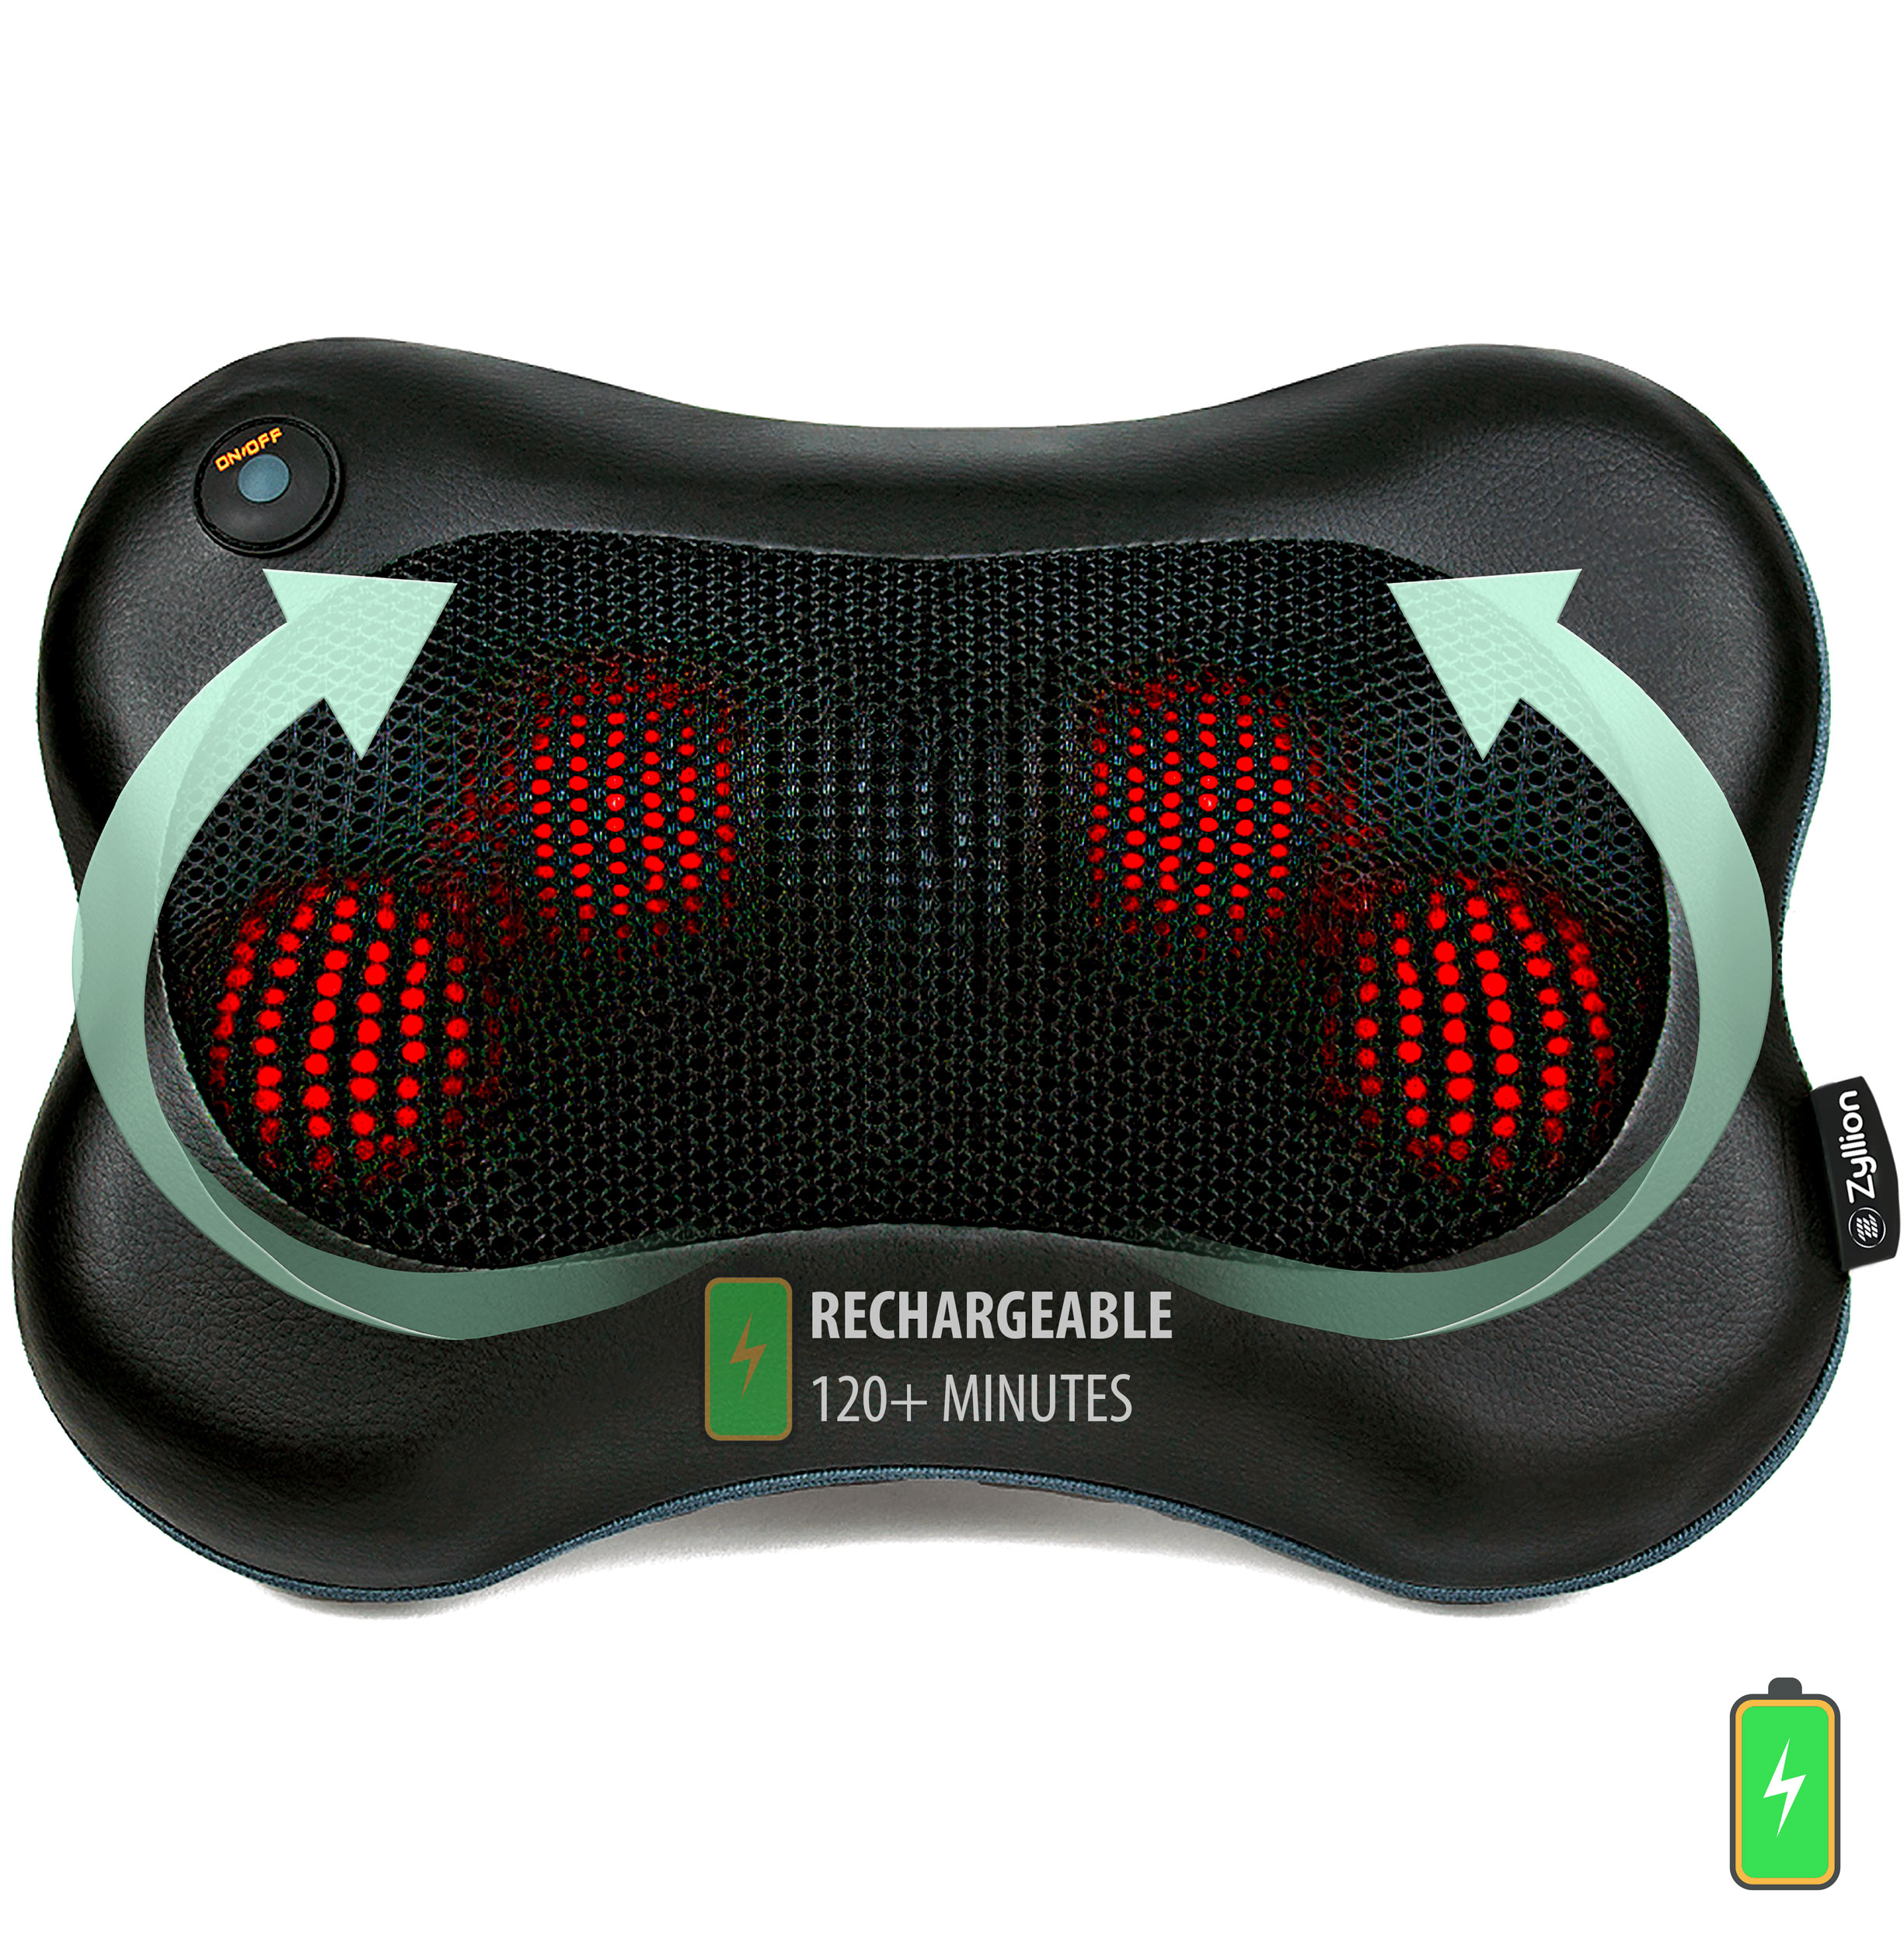 Zyllion Shiatsu Back and Neck Massager - Rechargeable 3D Kneading Deep Tissue Massage Pillow with Heat for Muscle Pain Relief, Chairs and Cars (Cordless) - Black (ZMA-13RB-BK) - image 1 of 9